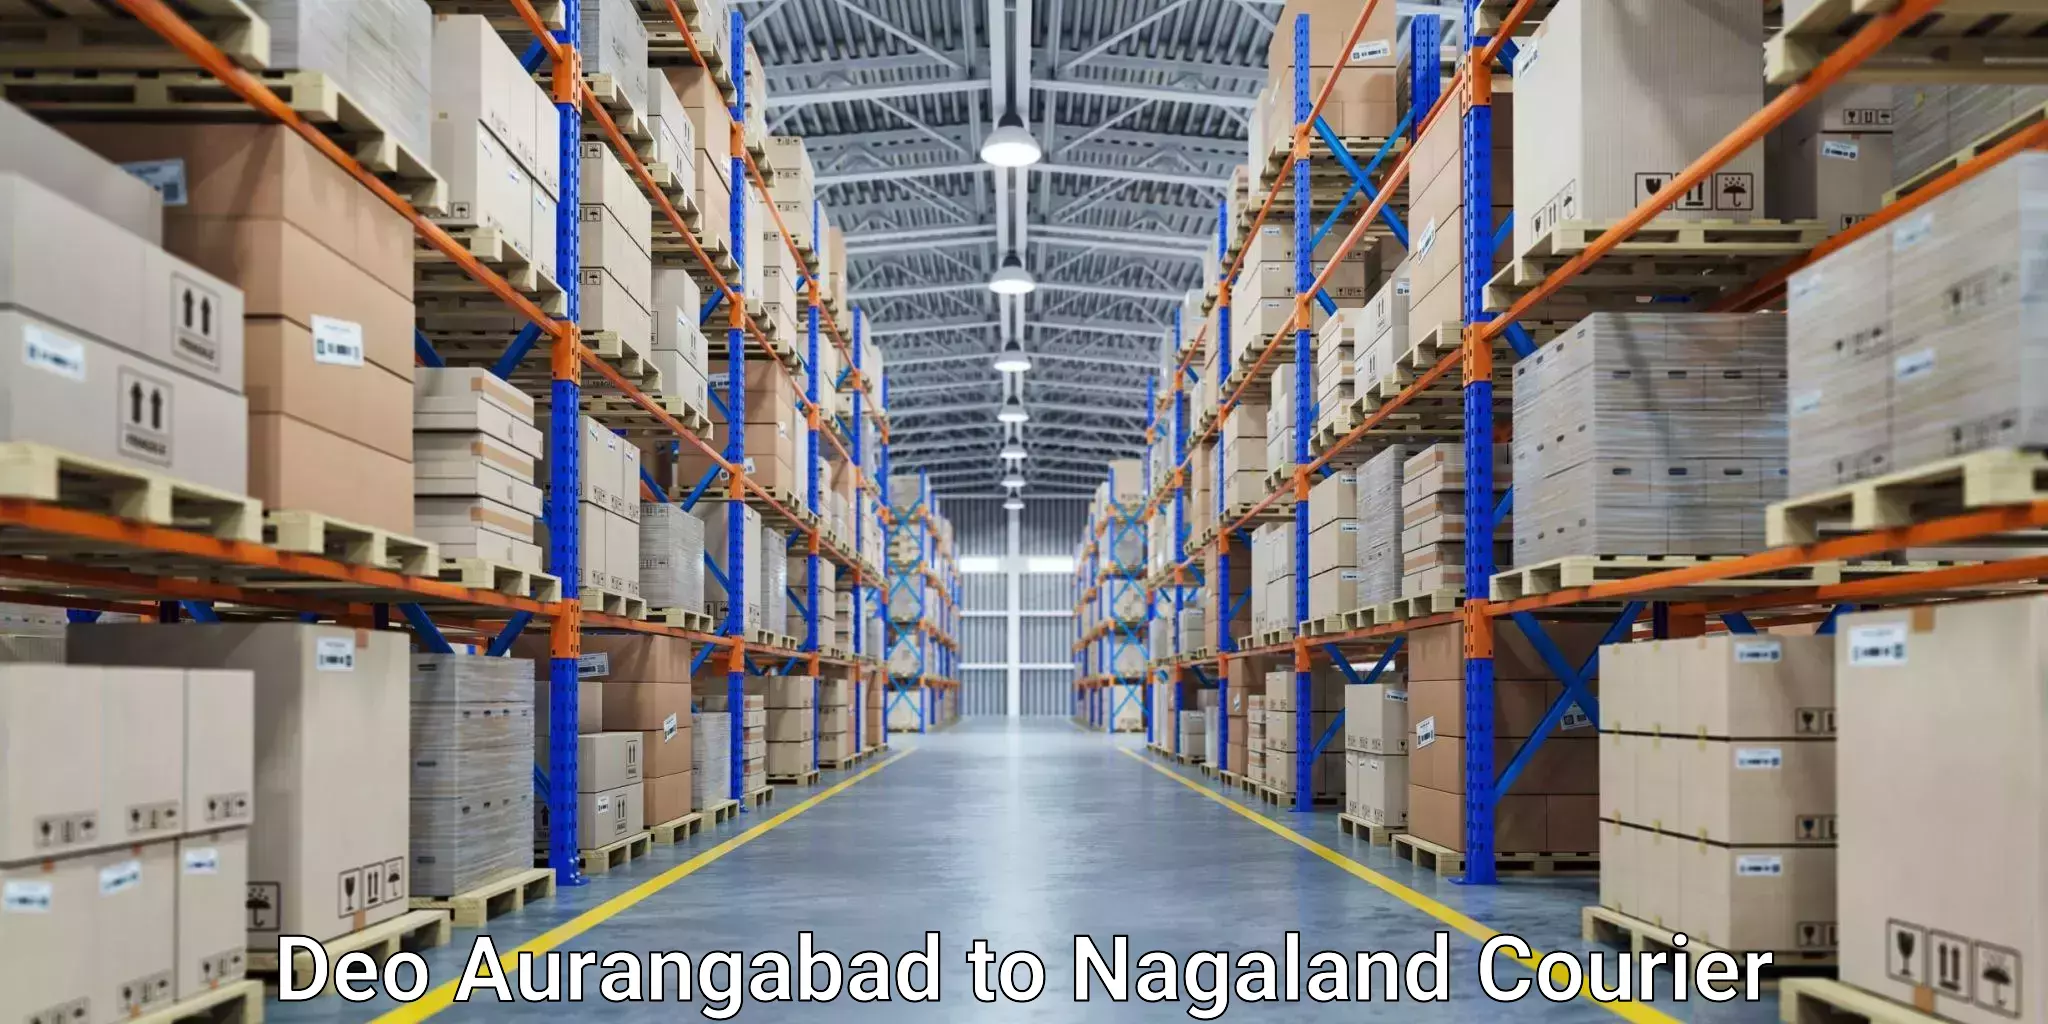 Same-day delivery options Deo Aurangabad to Nagaland